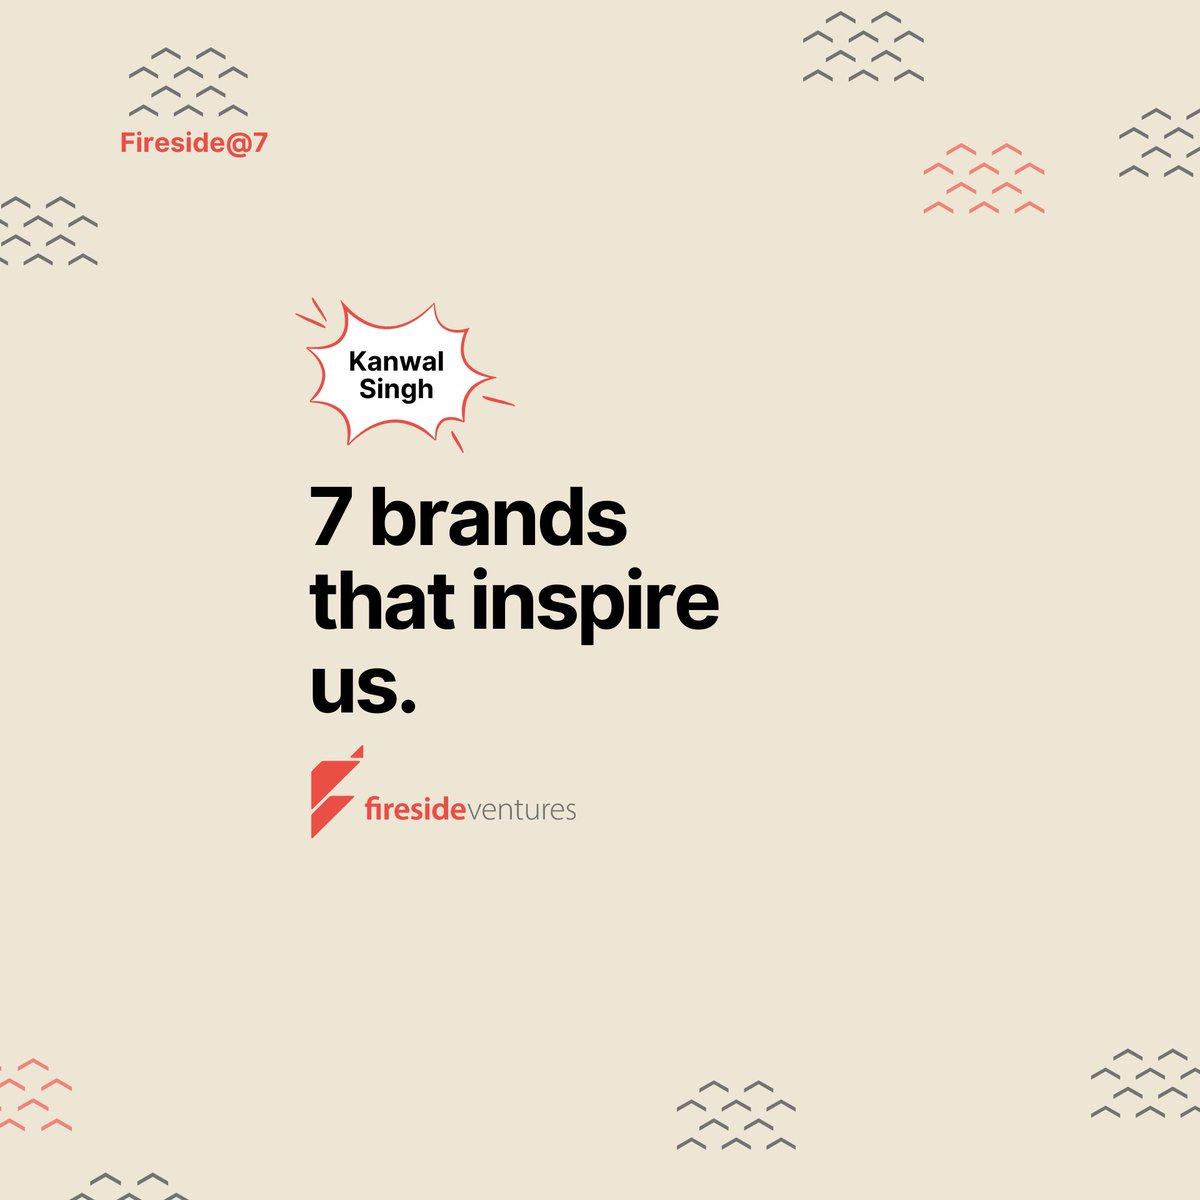 It's been 7 years of watching a whole new generation of consumer brands do good to do well. Here are 7 new-age brands that inspire us, by @Kanwal_fireside 
🎂🎉🎈
#anniversary #7things #Firesideat7 #FiresideIgnite (1/9)